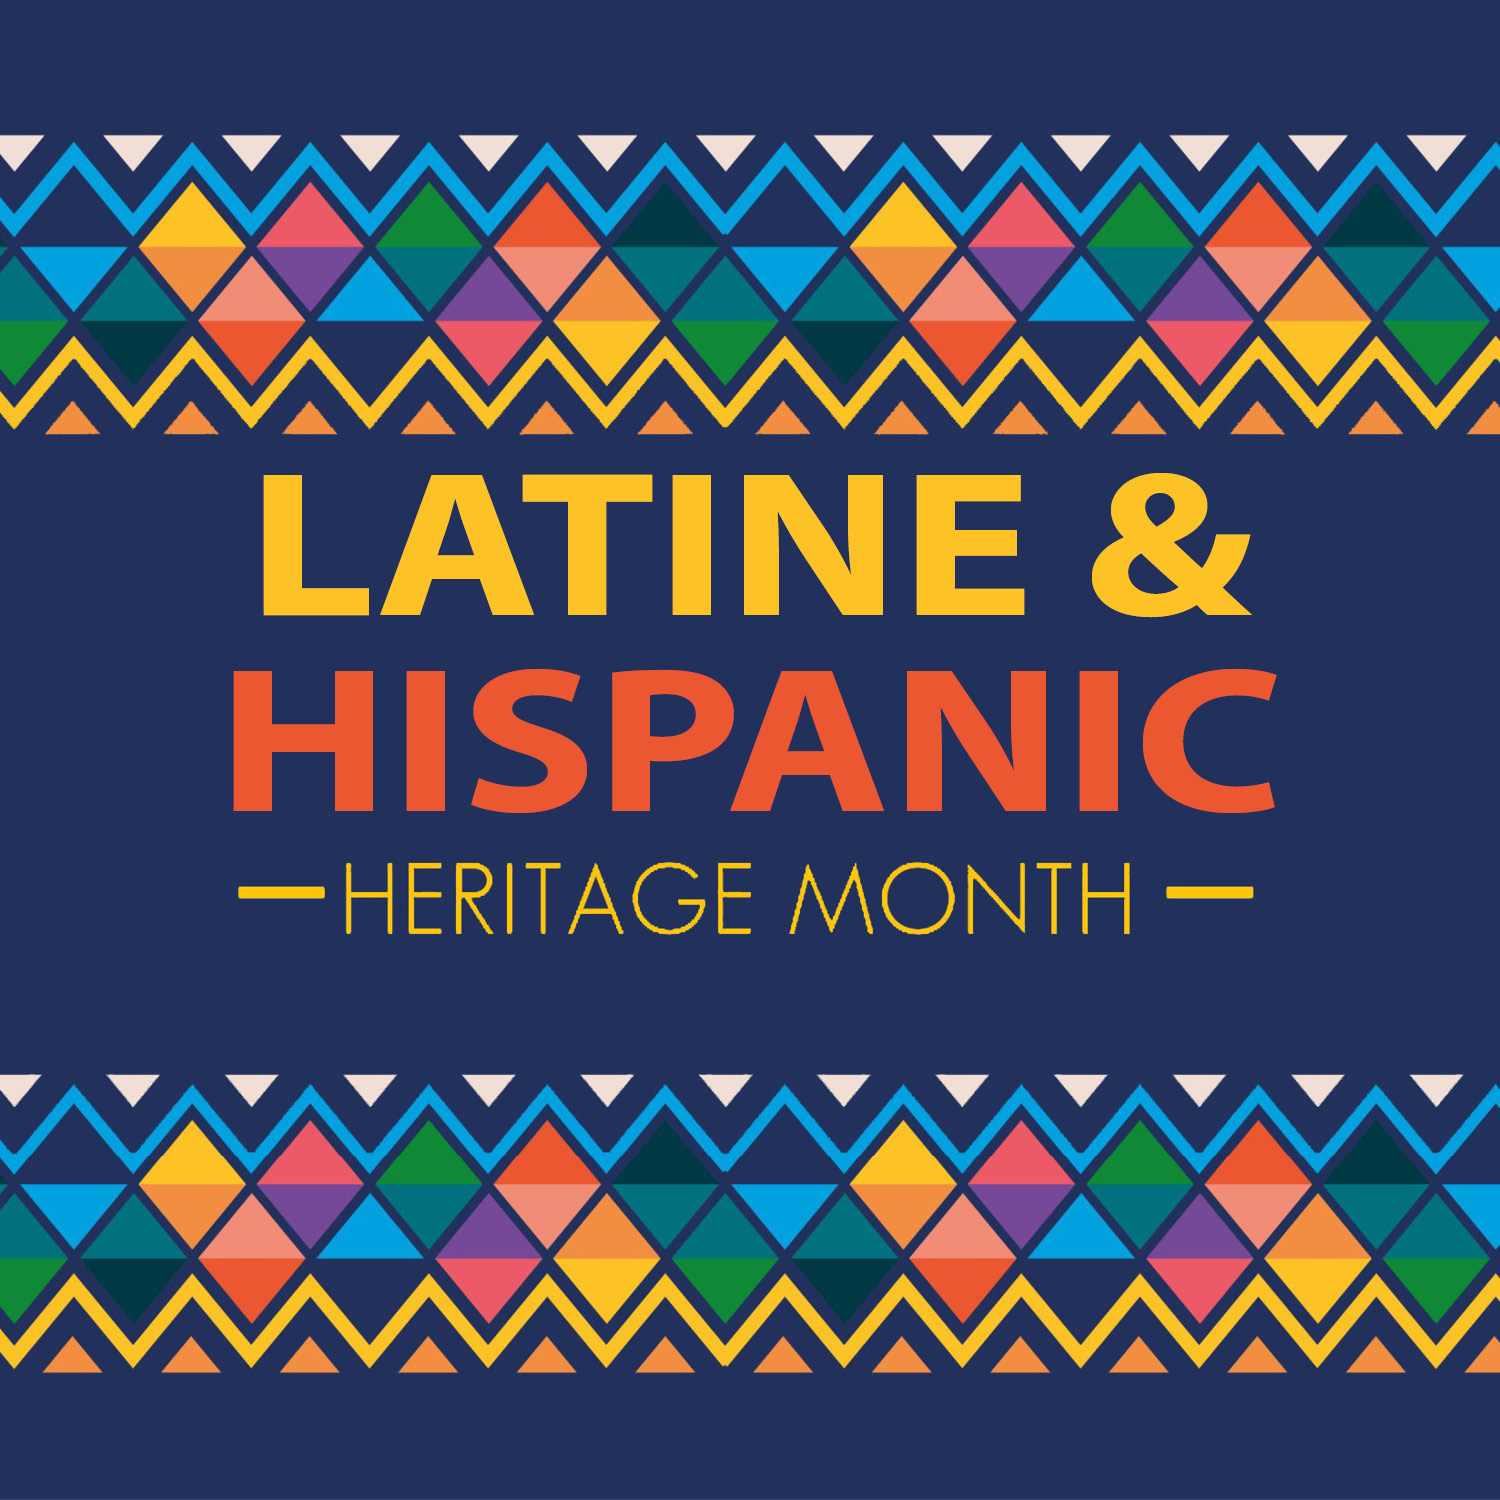 Celebrate the start of Latine & Hispanic Heritage Month with these resources & activities